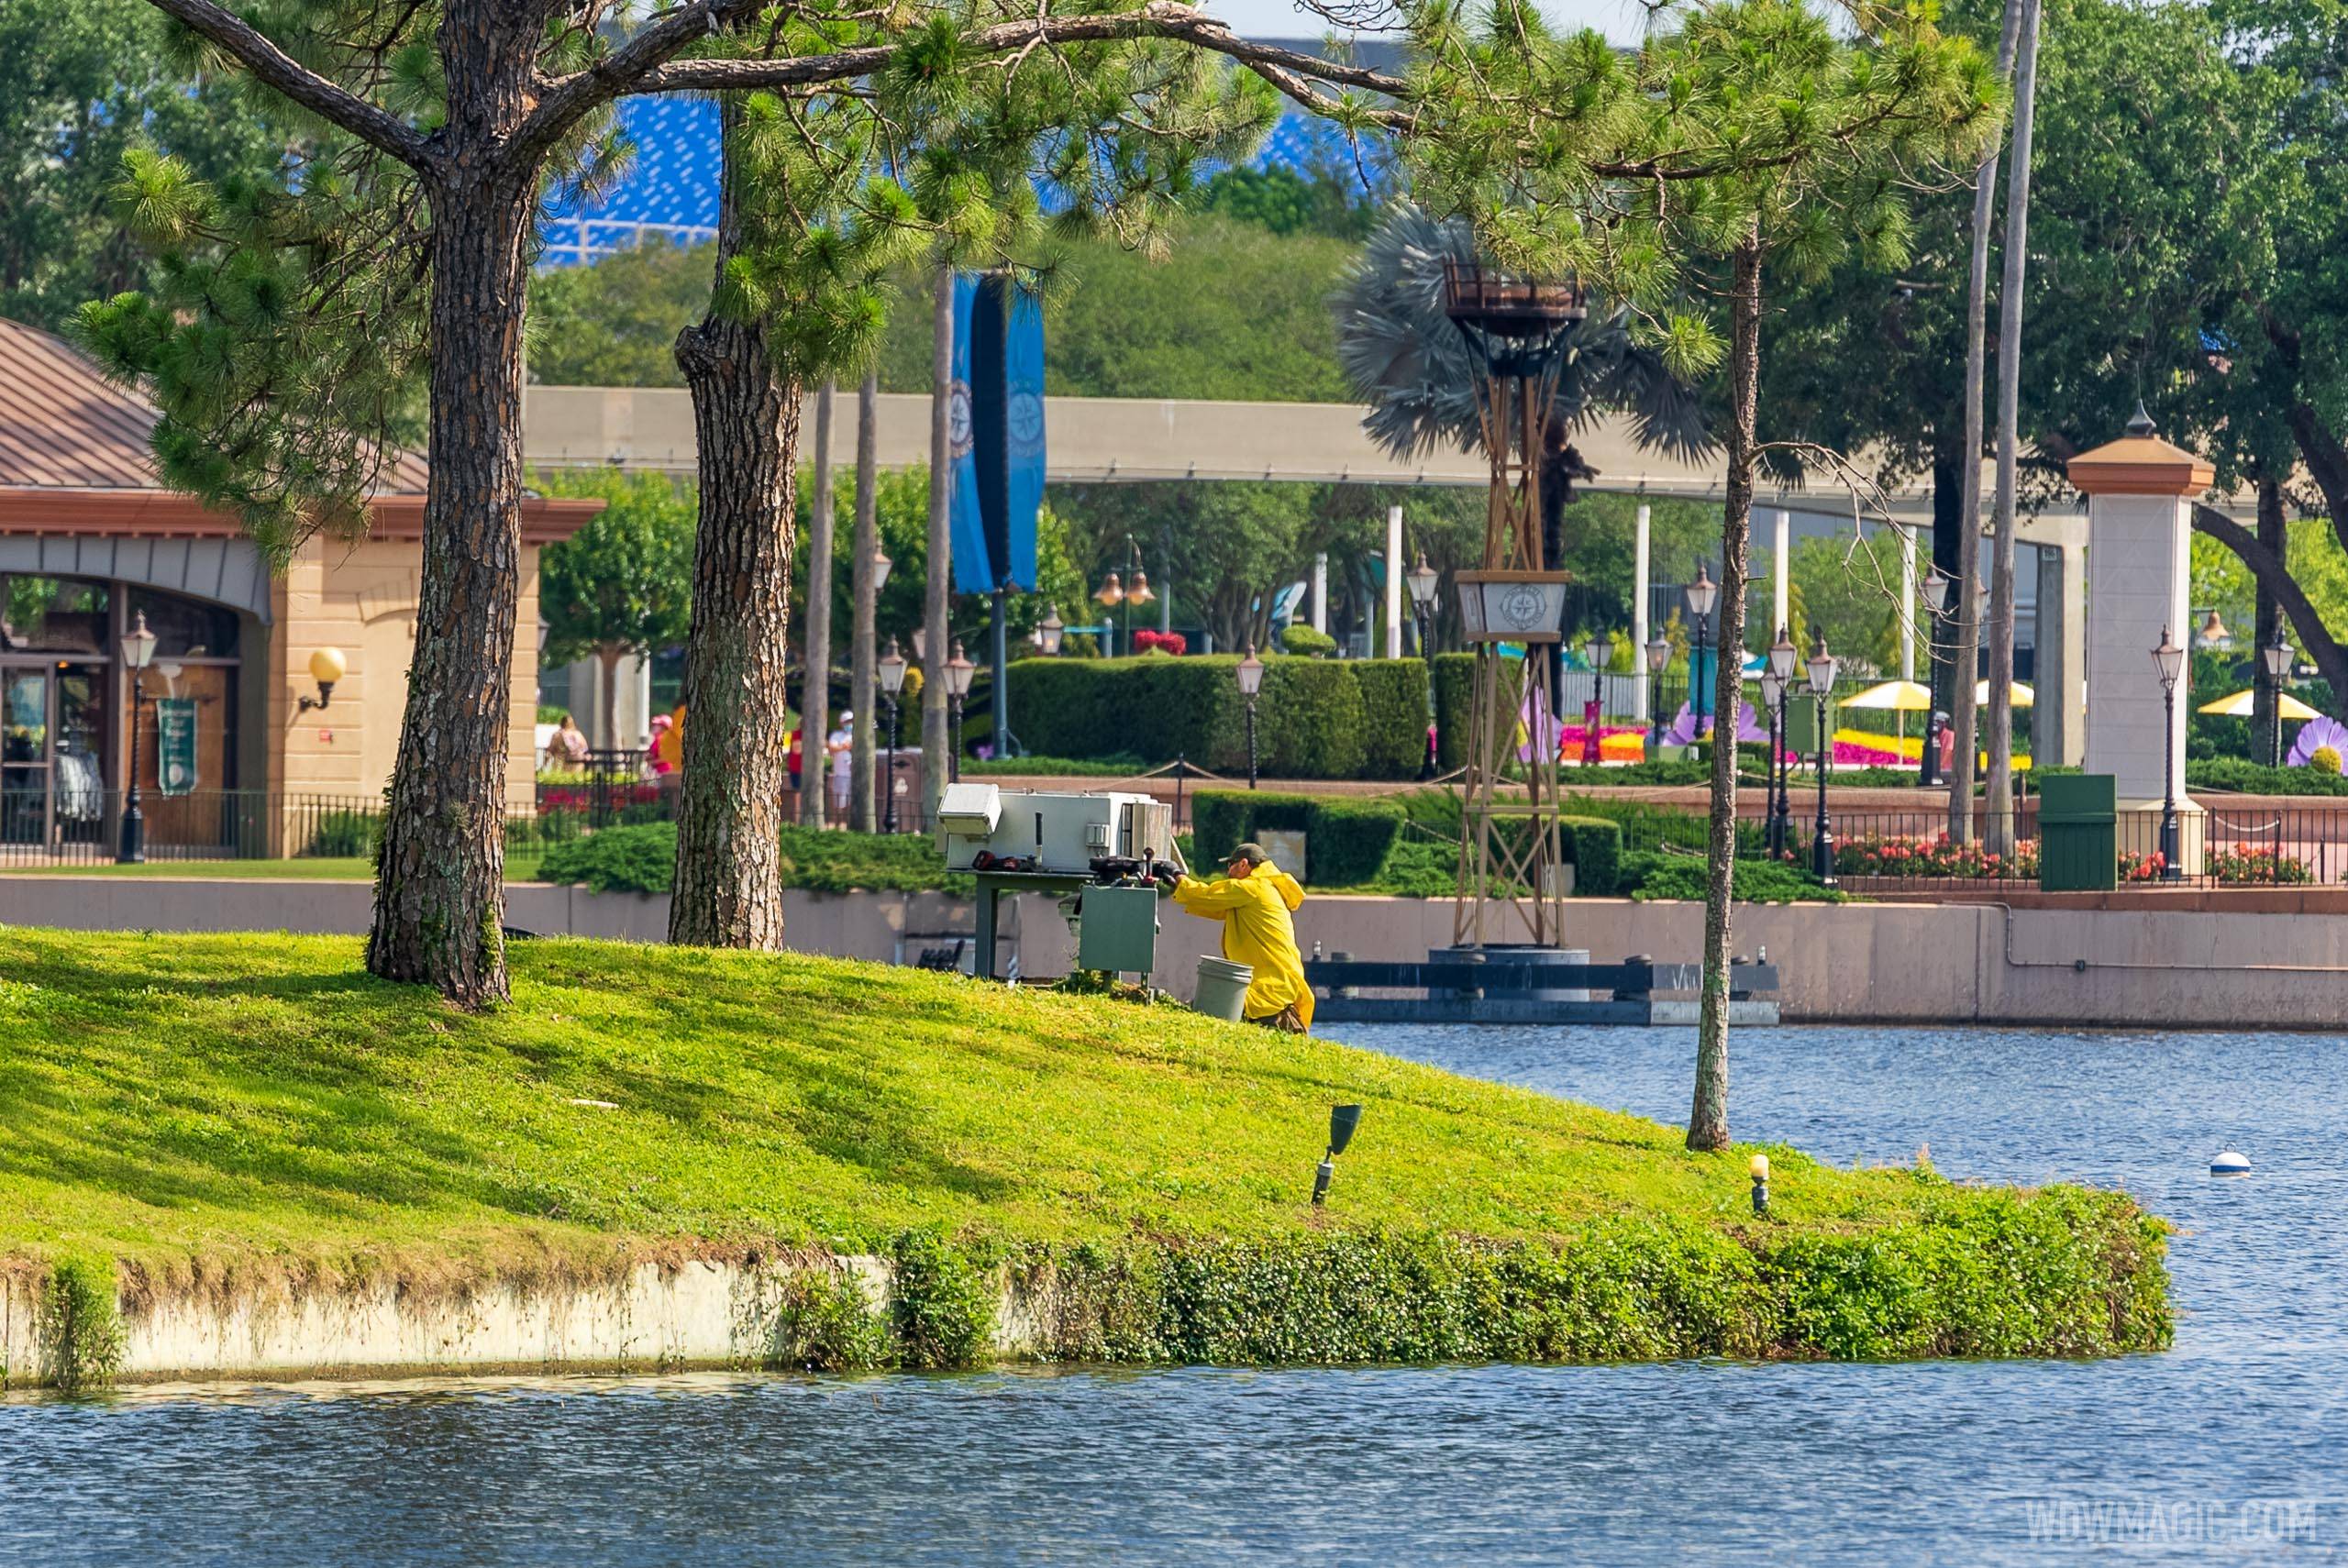 Work taking place on EPCOT'S island based lasers ahead of Harmonious